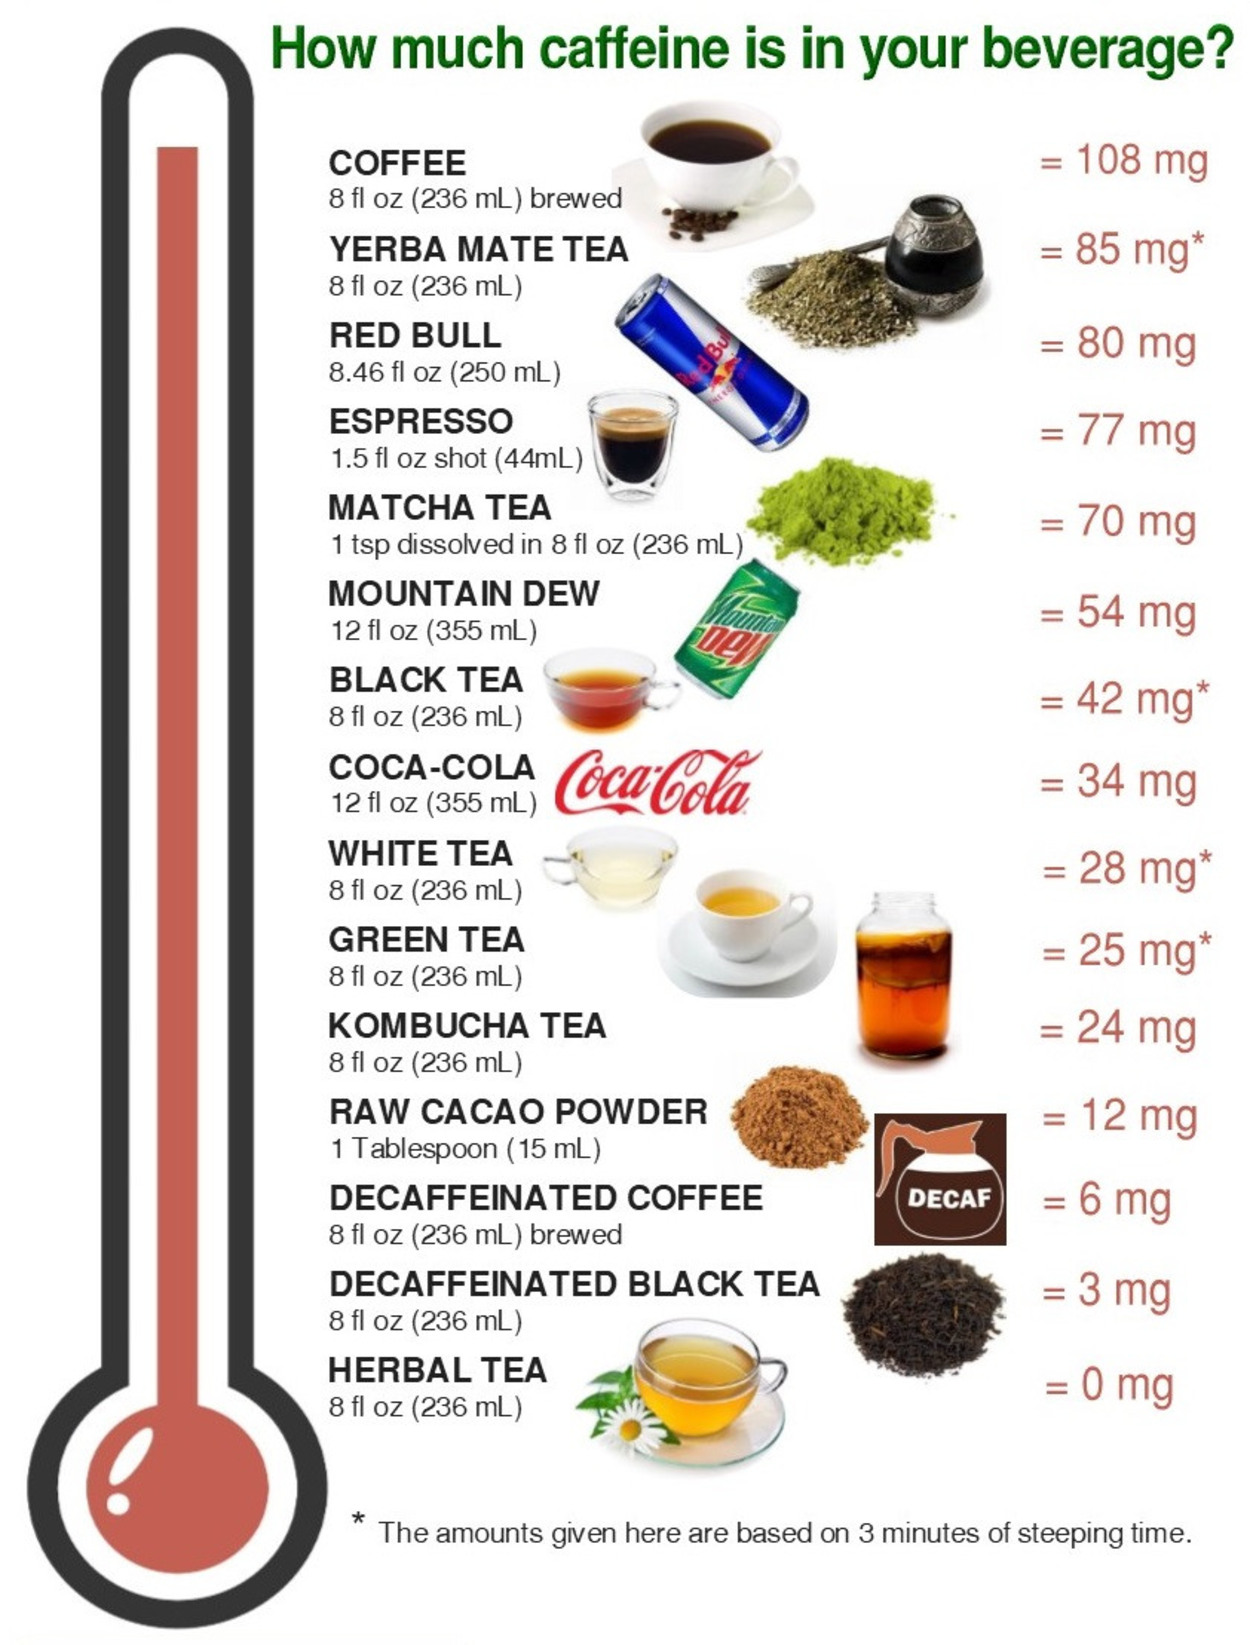 Levels of caffeine in various food items